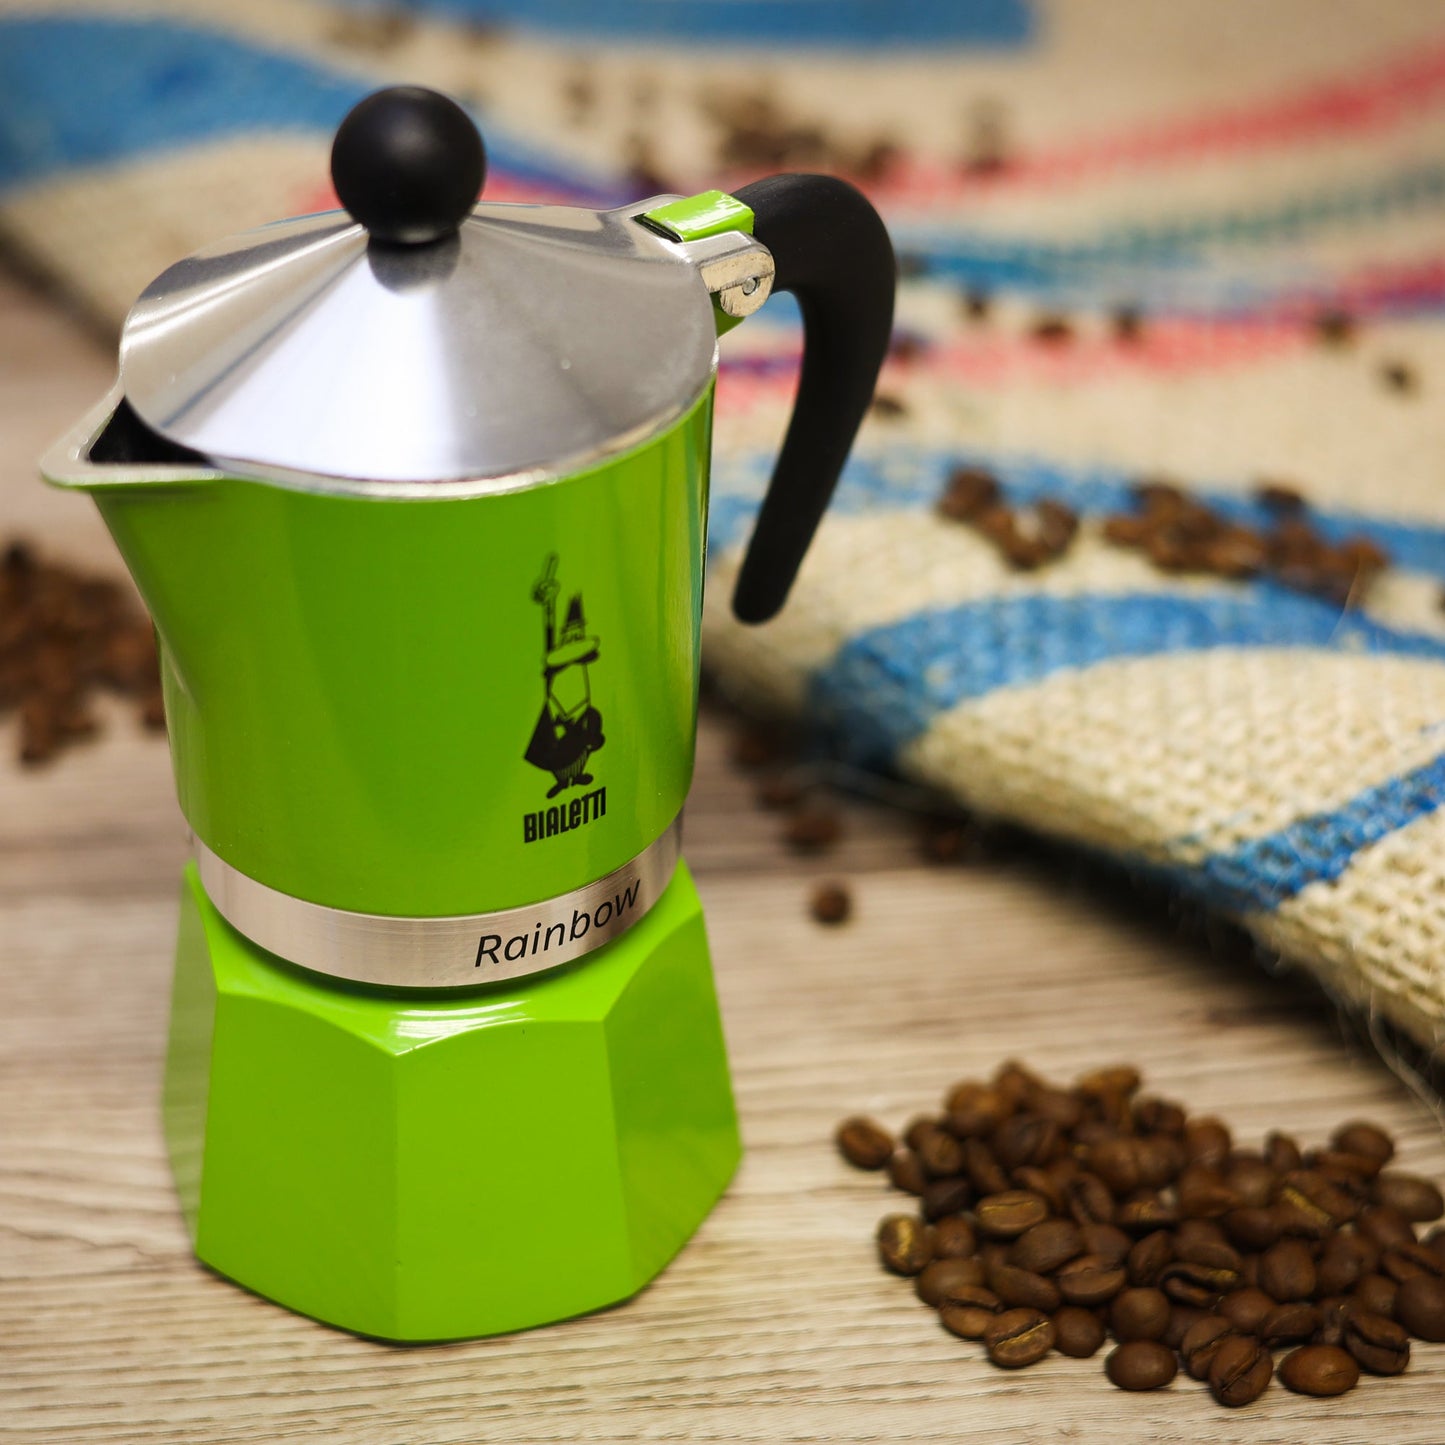 Bialetti -Moka Pot 6 Cup Green Metal Green Body,Black plastic Handle and Stainless Steel Lid with Small plastic Black Ball on top- Velo Coffee Roasters